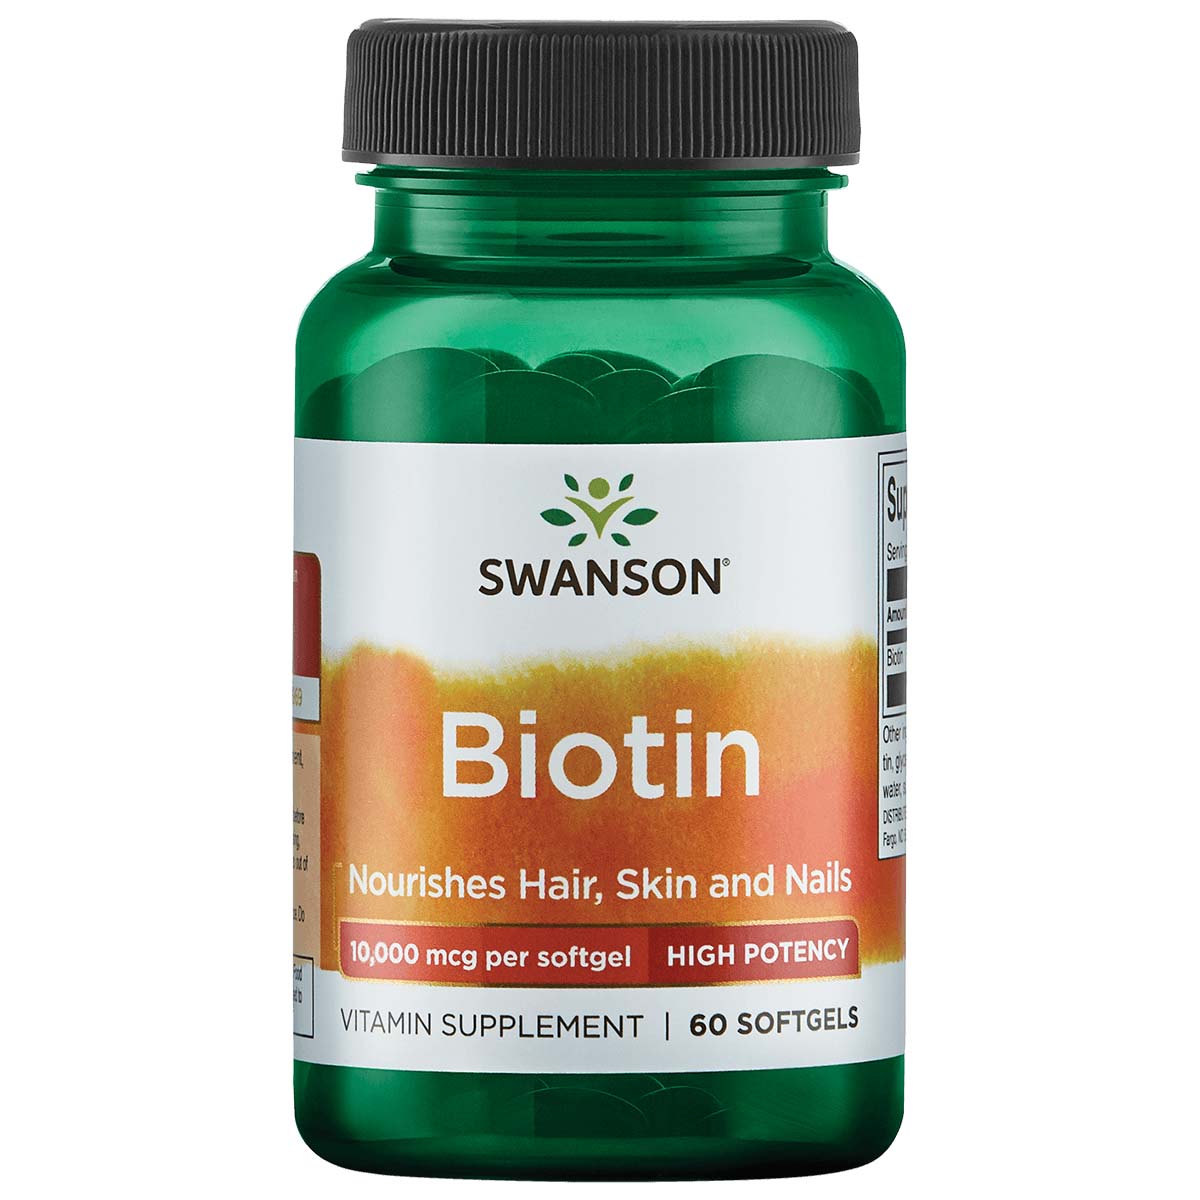 Swanson Biotin Timed Release, 10000 mcg, 60 Tablets